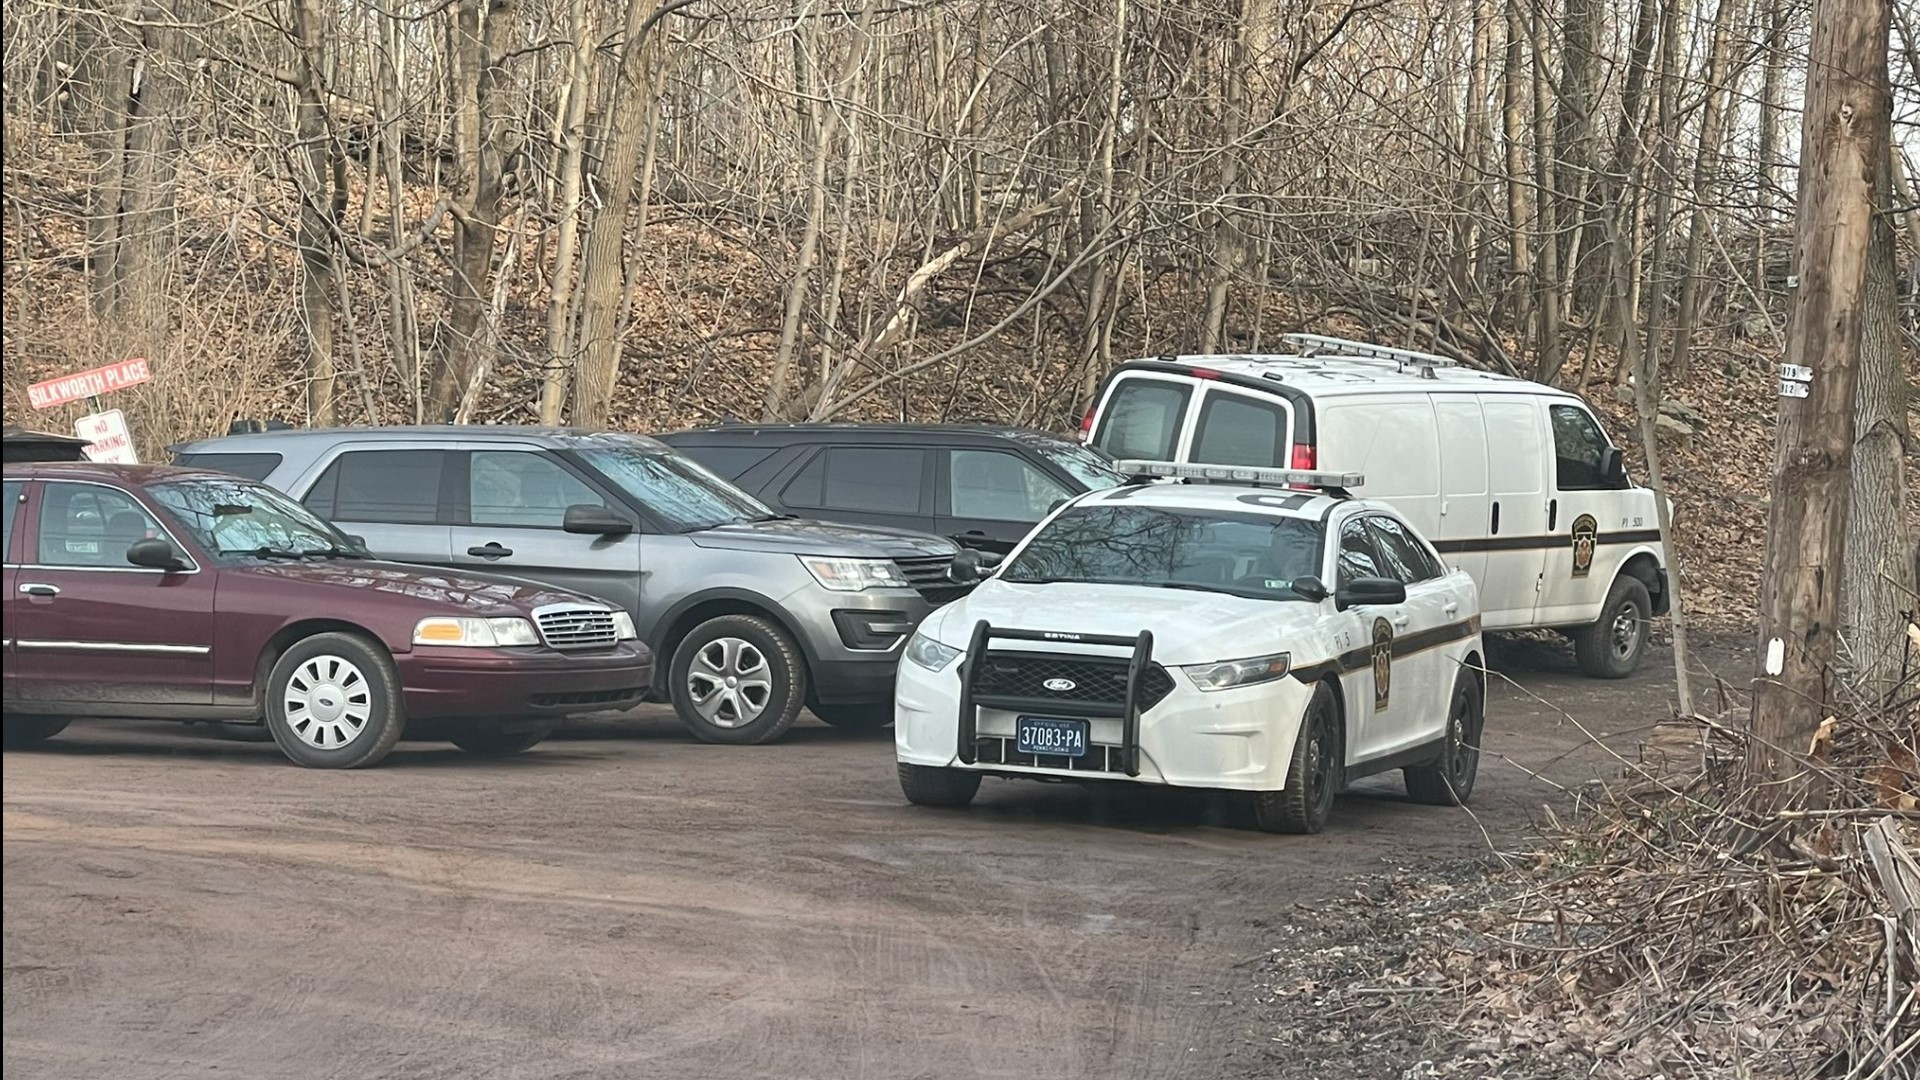 Troopers are searching in the area of Pike Creek Reservoir in Lehman Township.